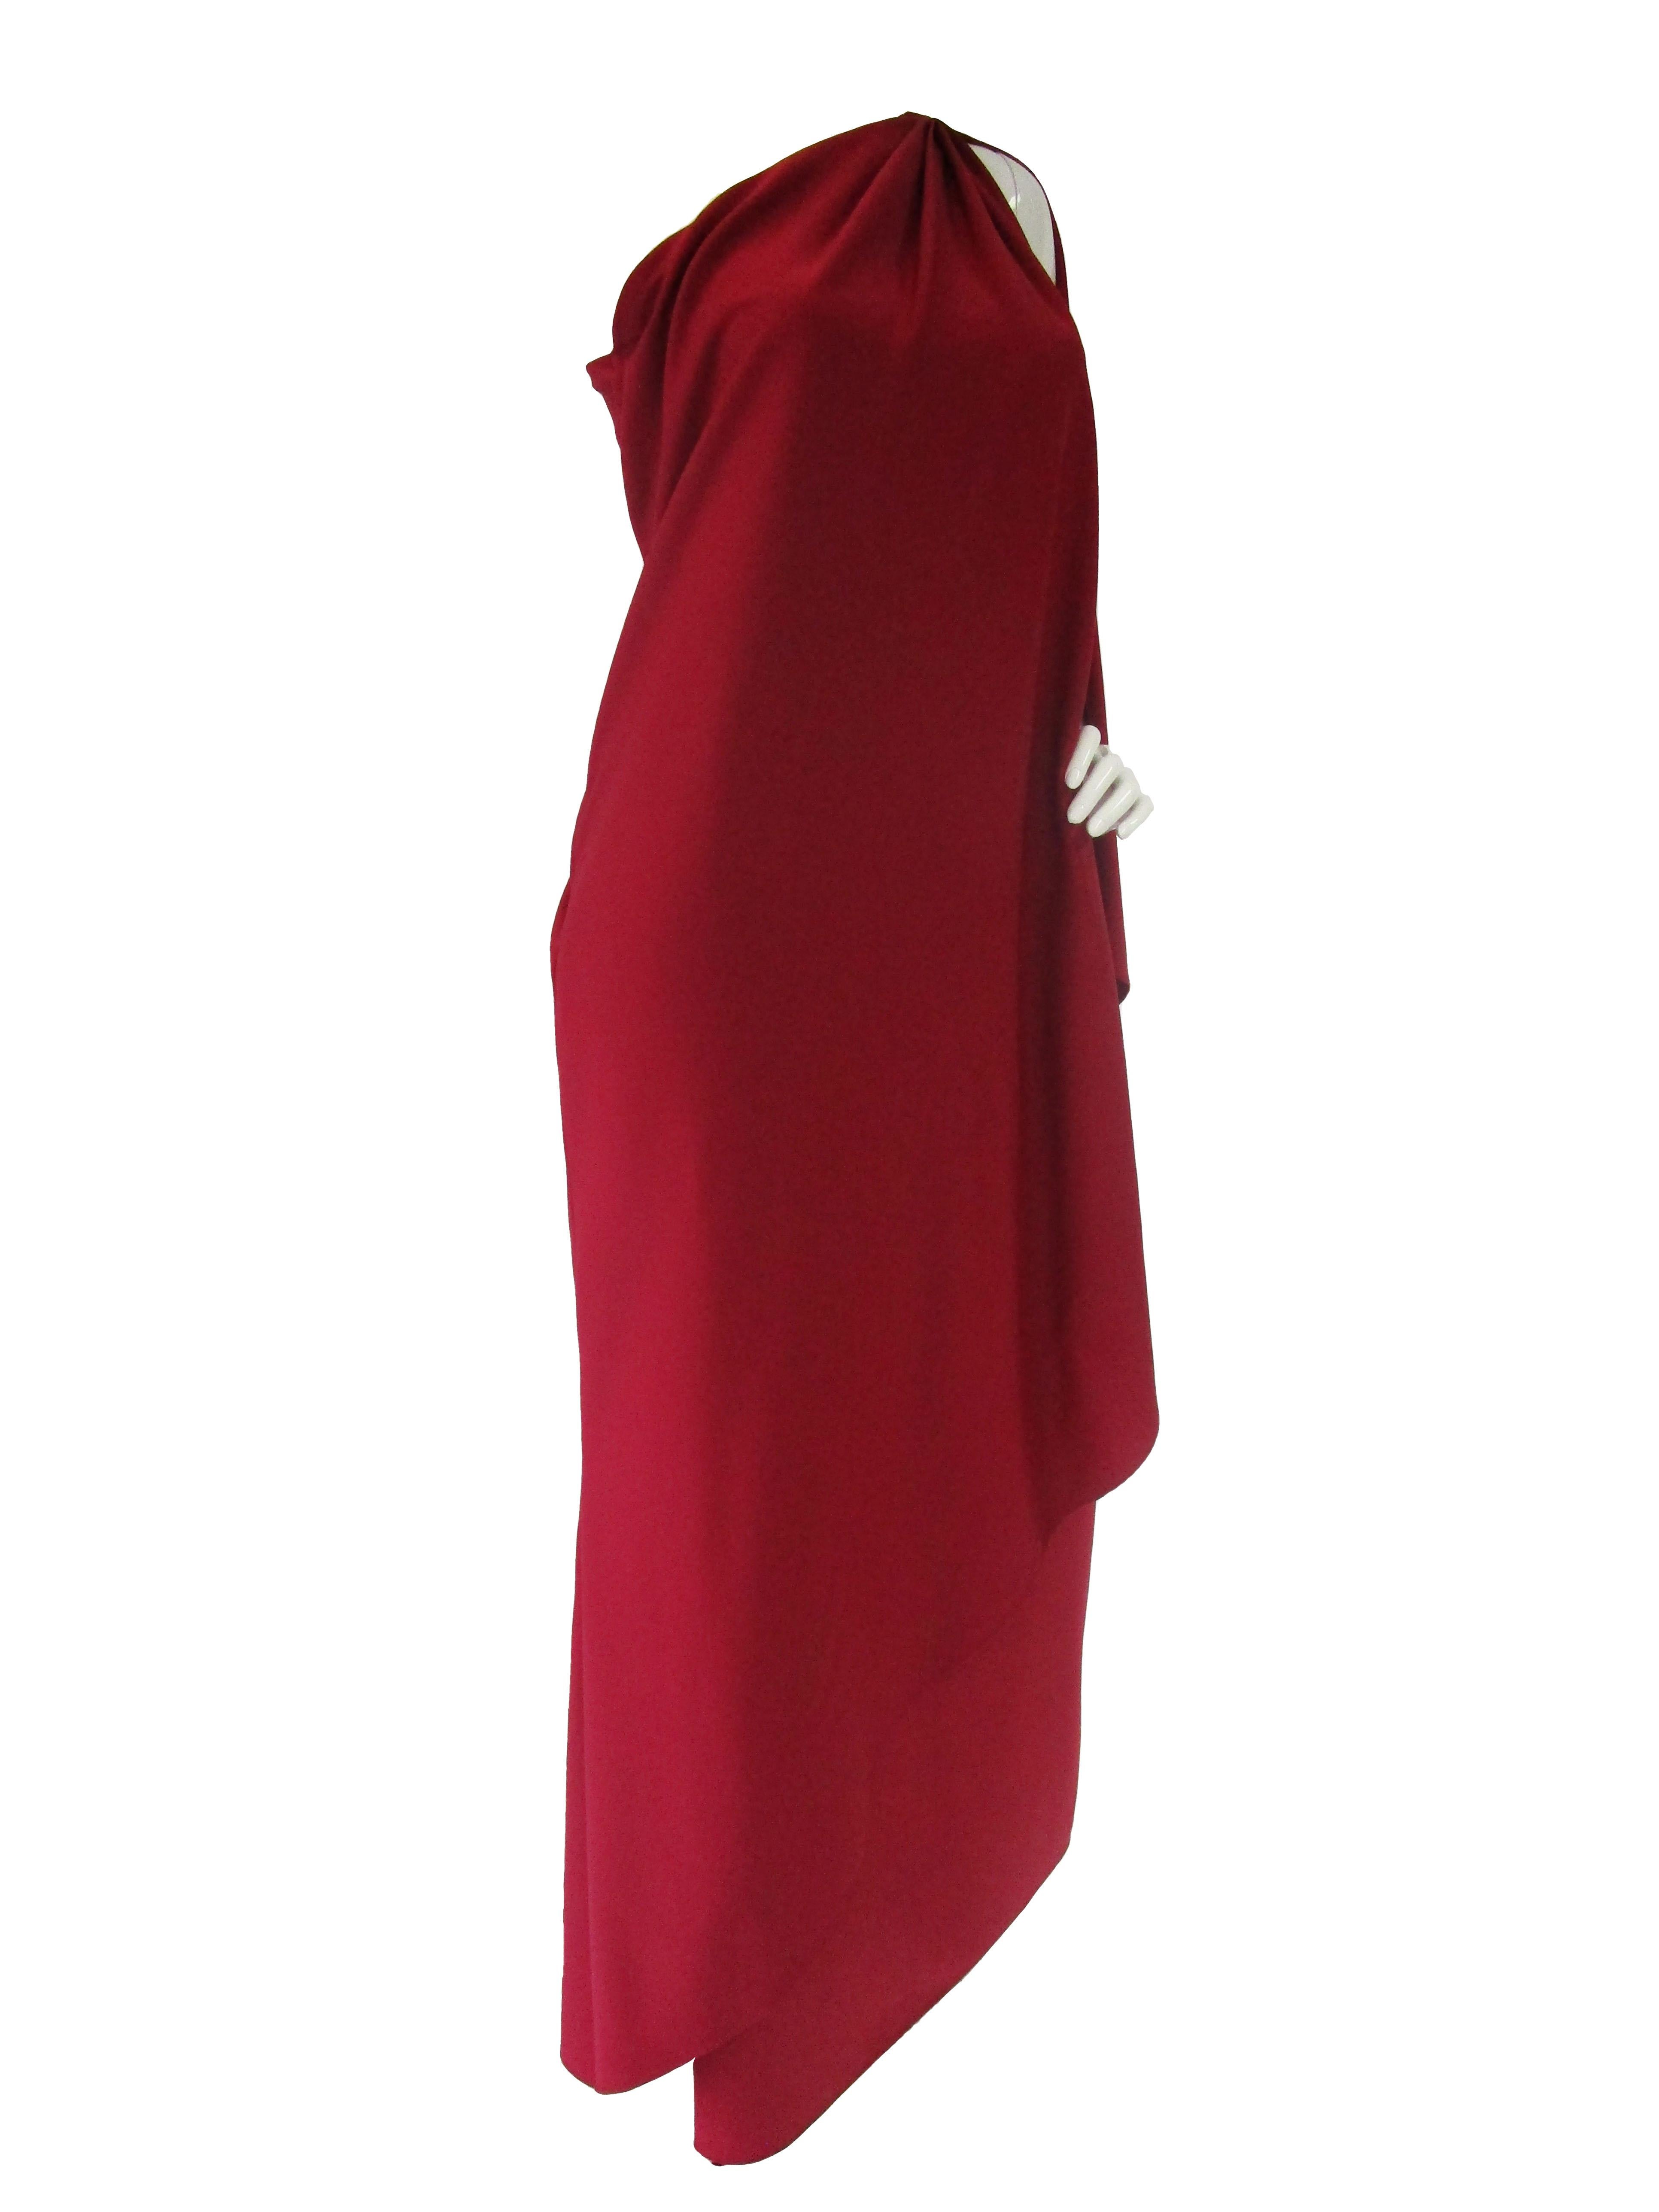 This elegant, ruby red, draped, Halston gown is “Classic Halston”.  With a sleeveless and ethereal bodice it is perfect for wear year-round. With a loose silhouette and a shoulder reveal, this is sure to be a showstopper. This gown is made by the